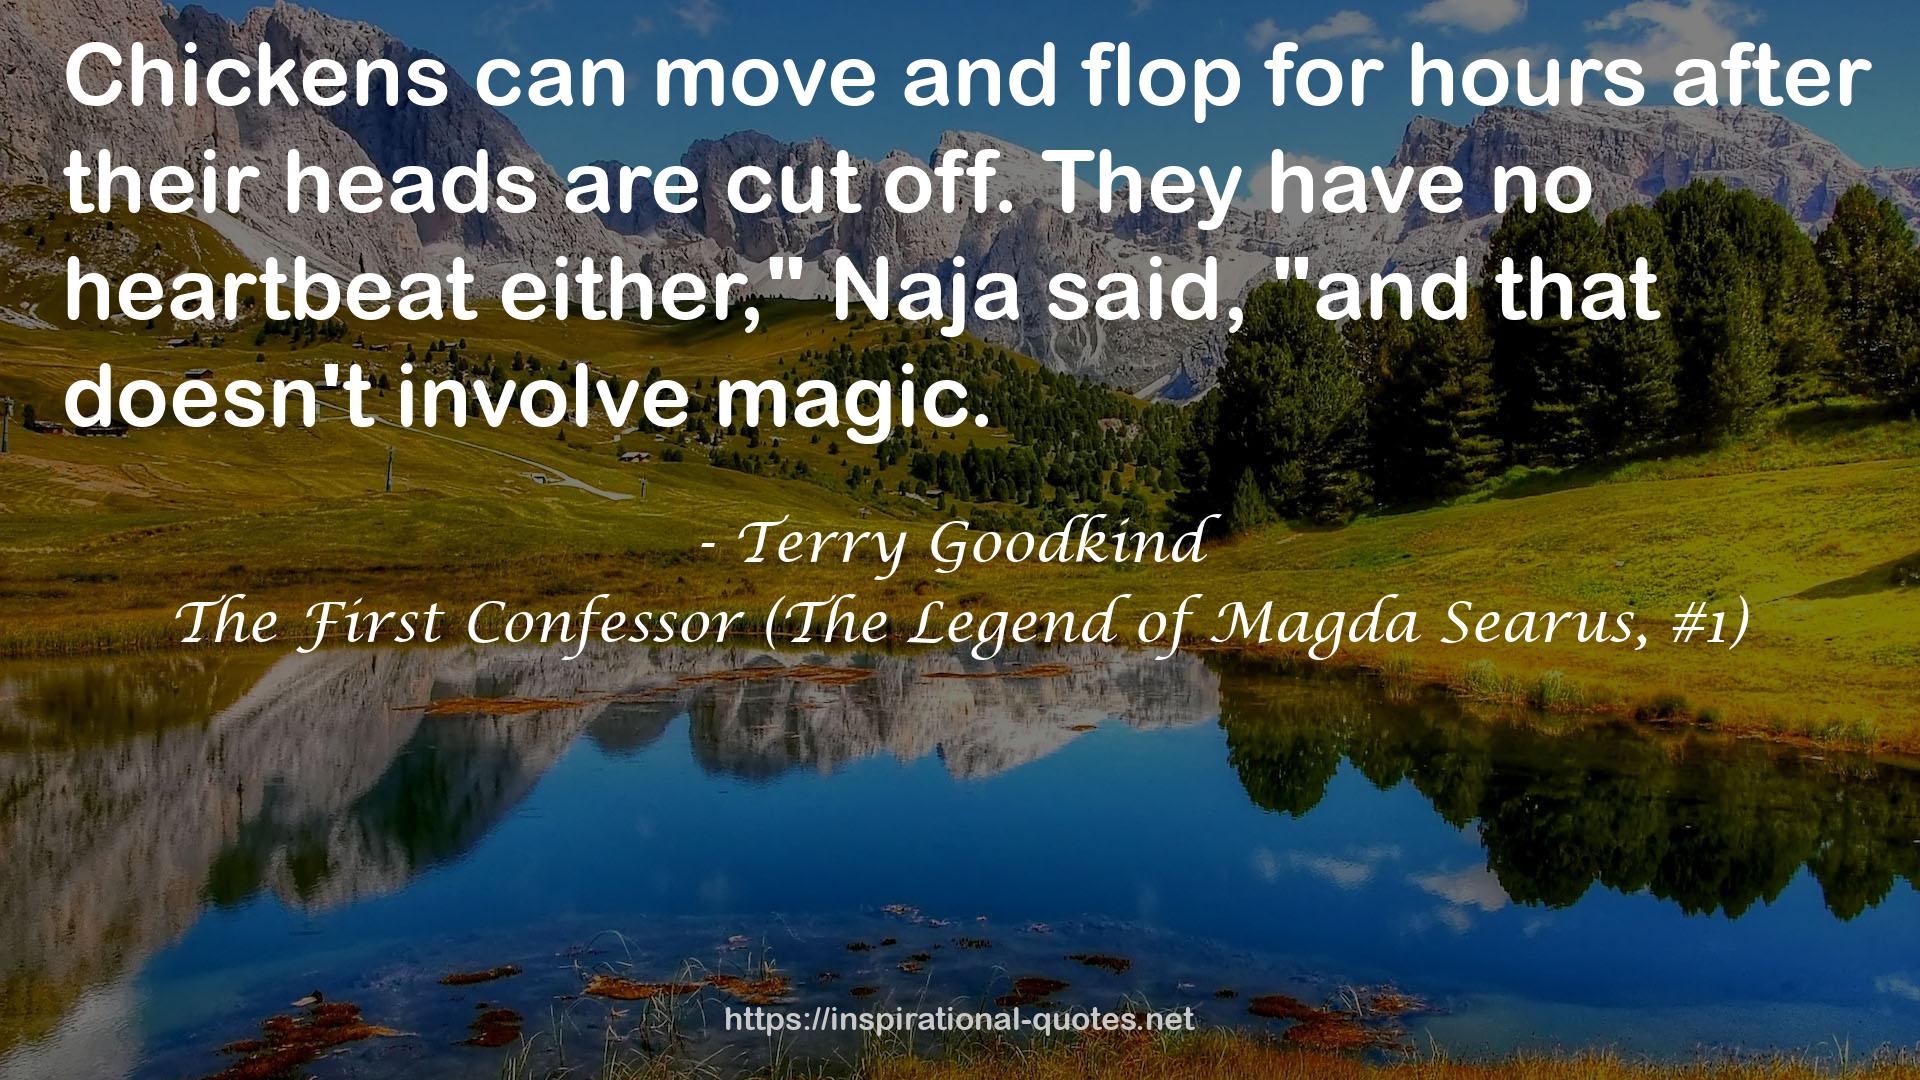 The First Confessor (The Legend of Magda Searus, #1) QUOTES